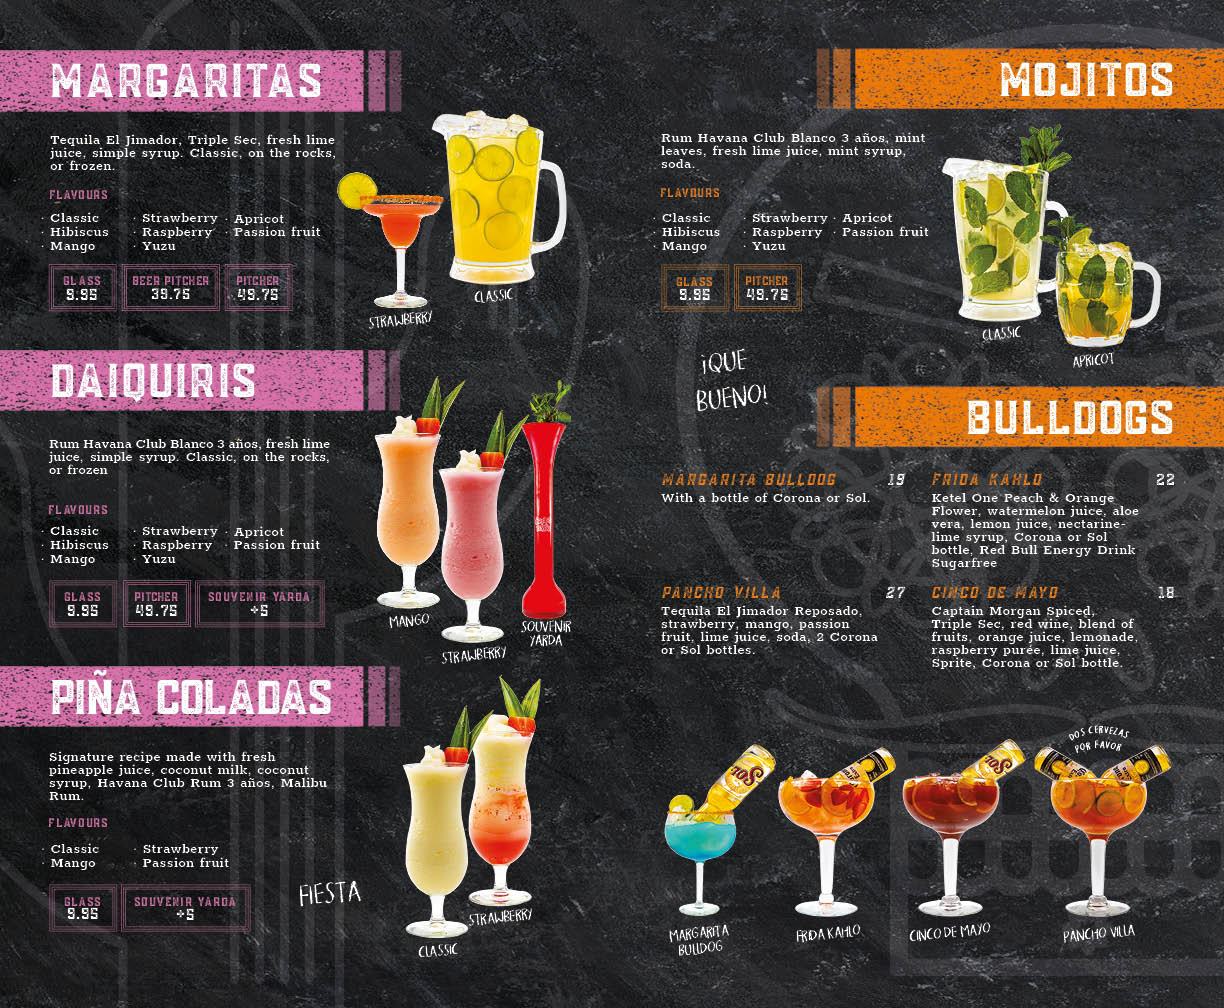 Classic Cocktails and Bulldogs menu